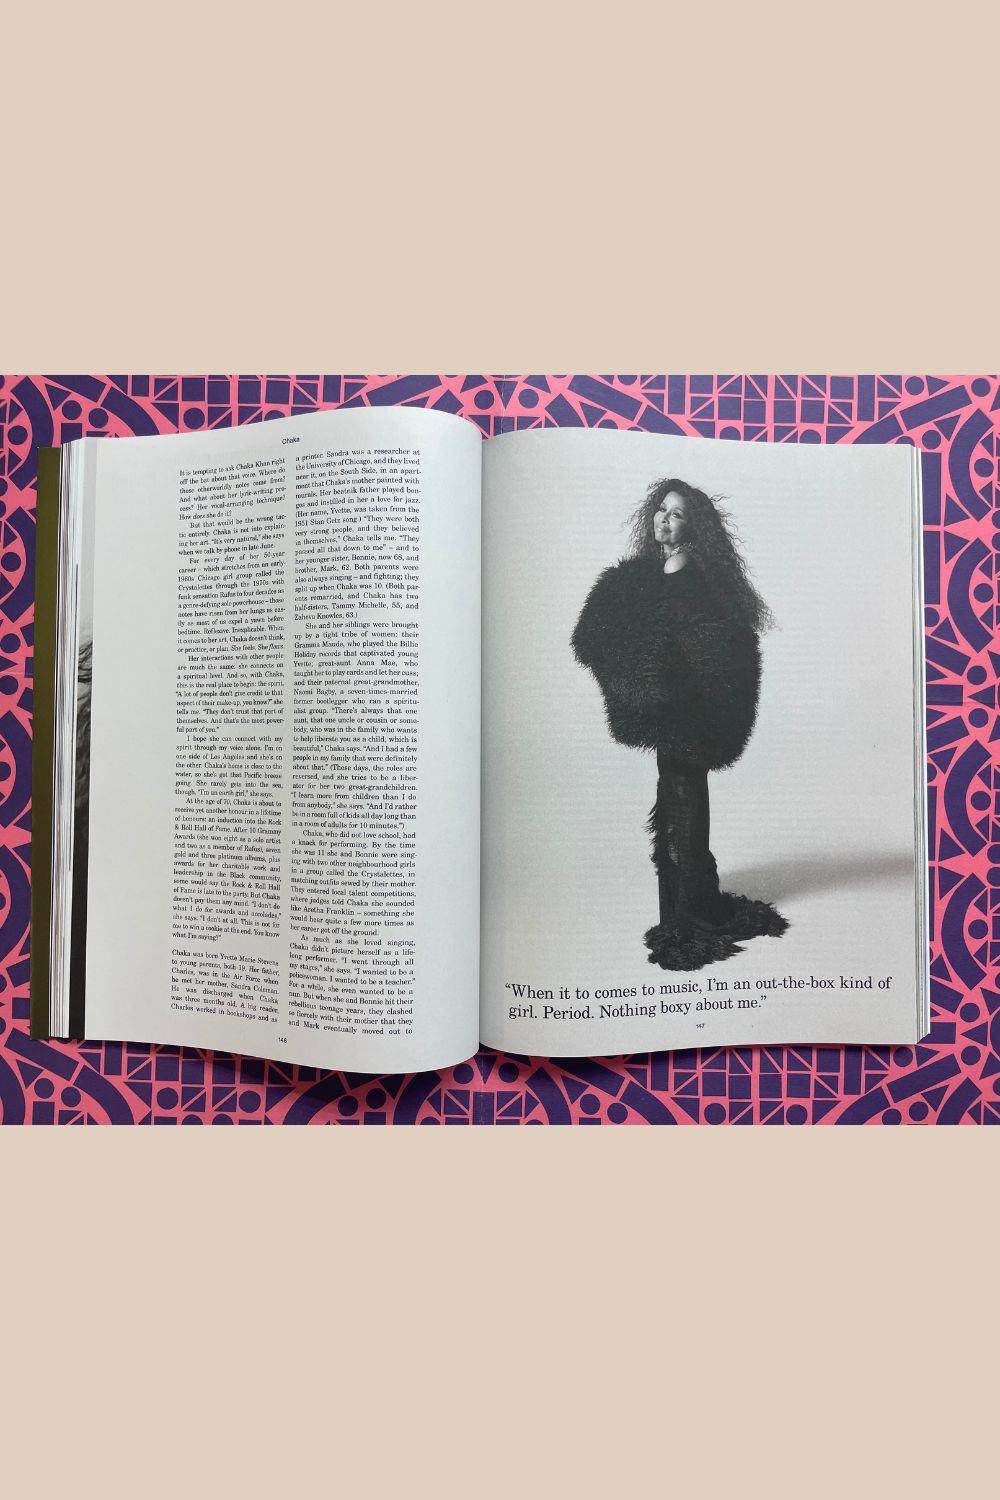 The Gentlewoman Issue 28